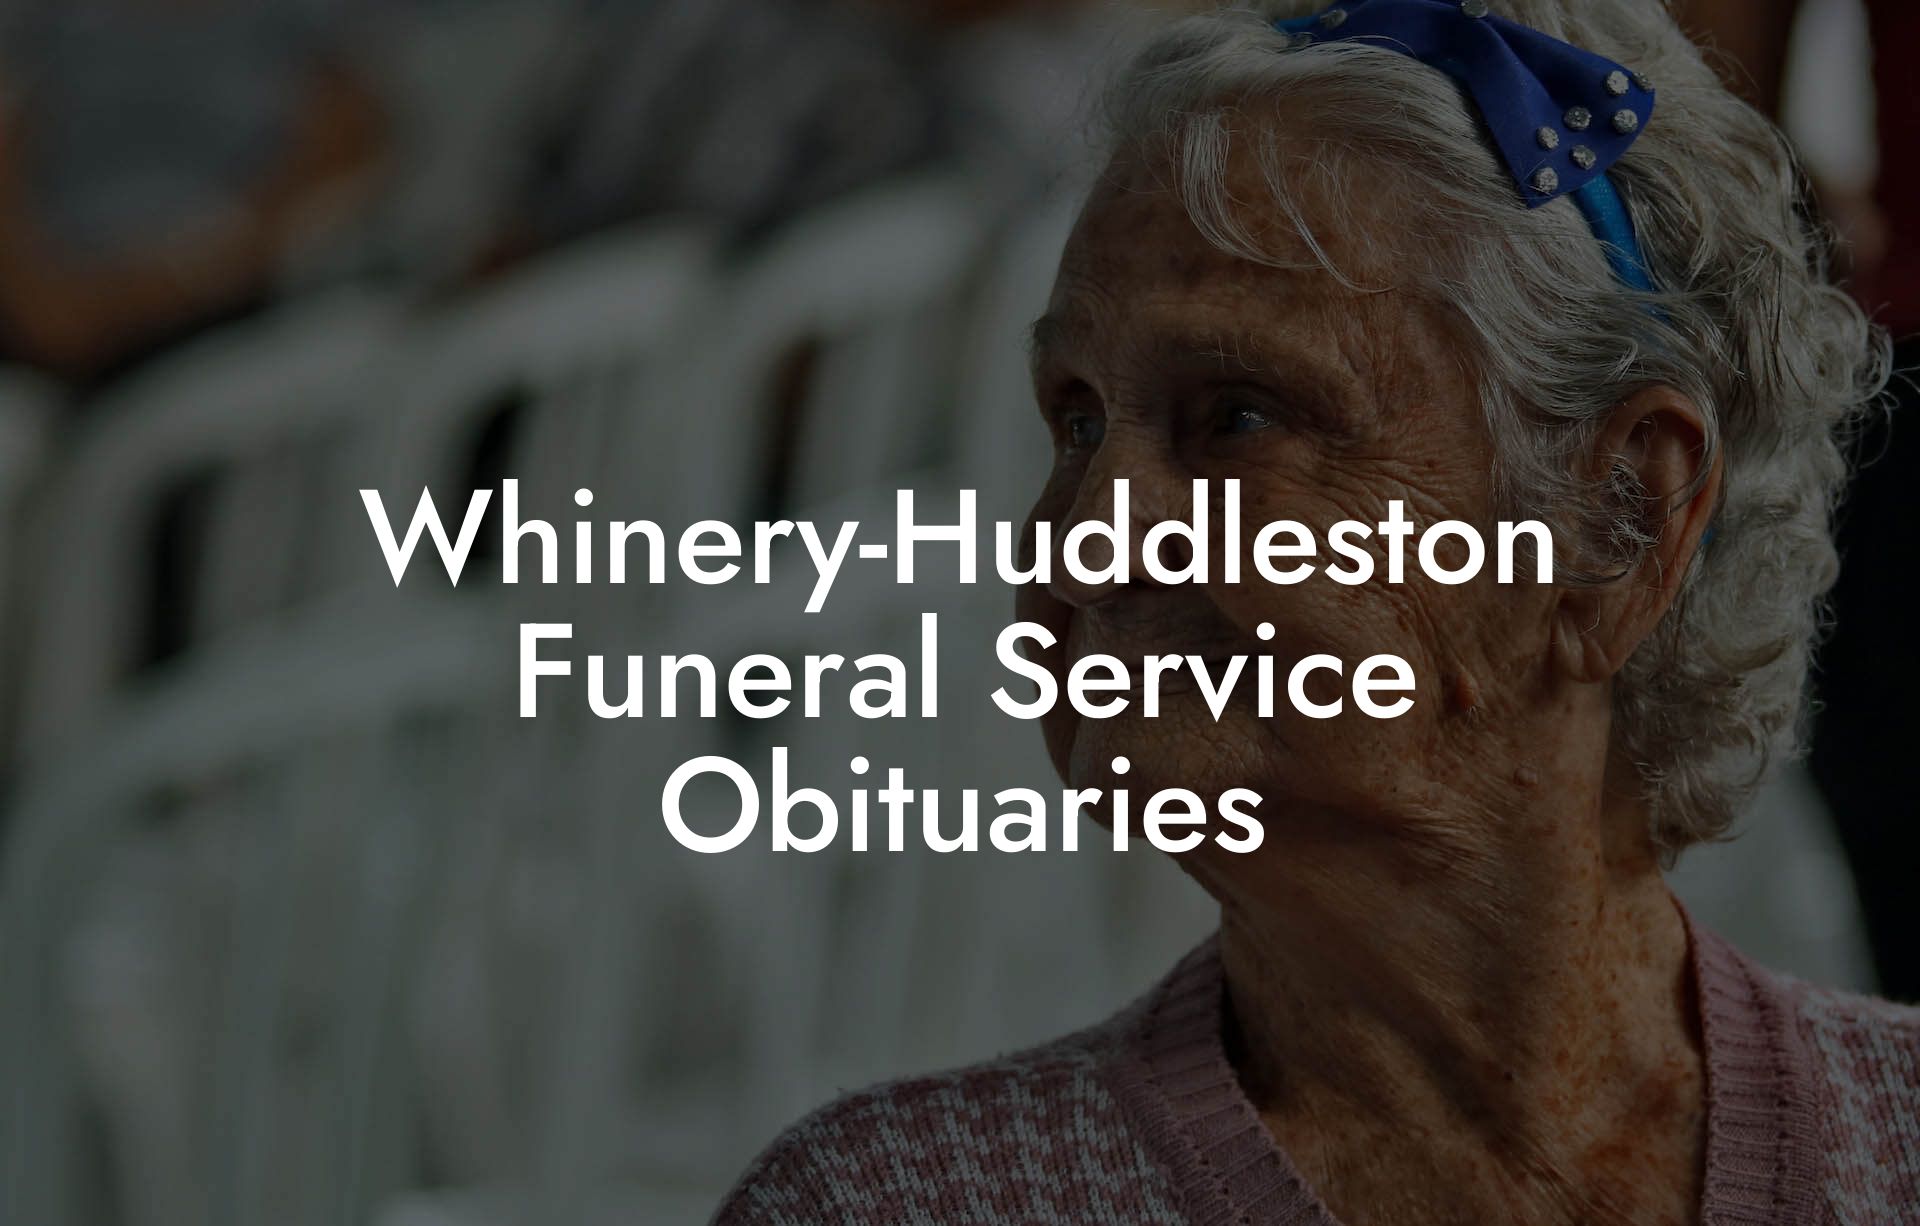 Whinery-Huddleston Funeral Service Obituaries